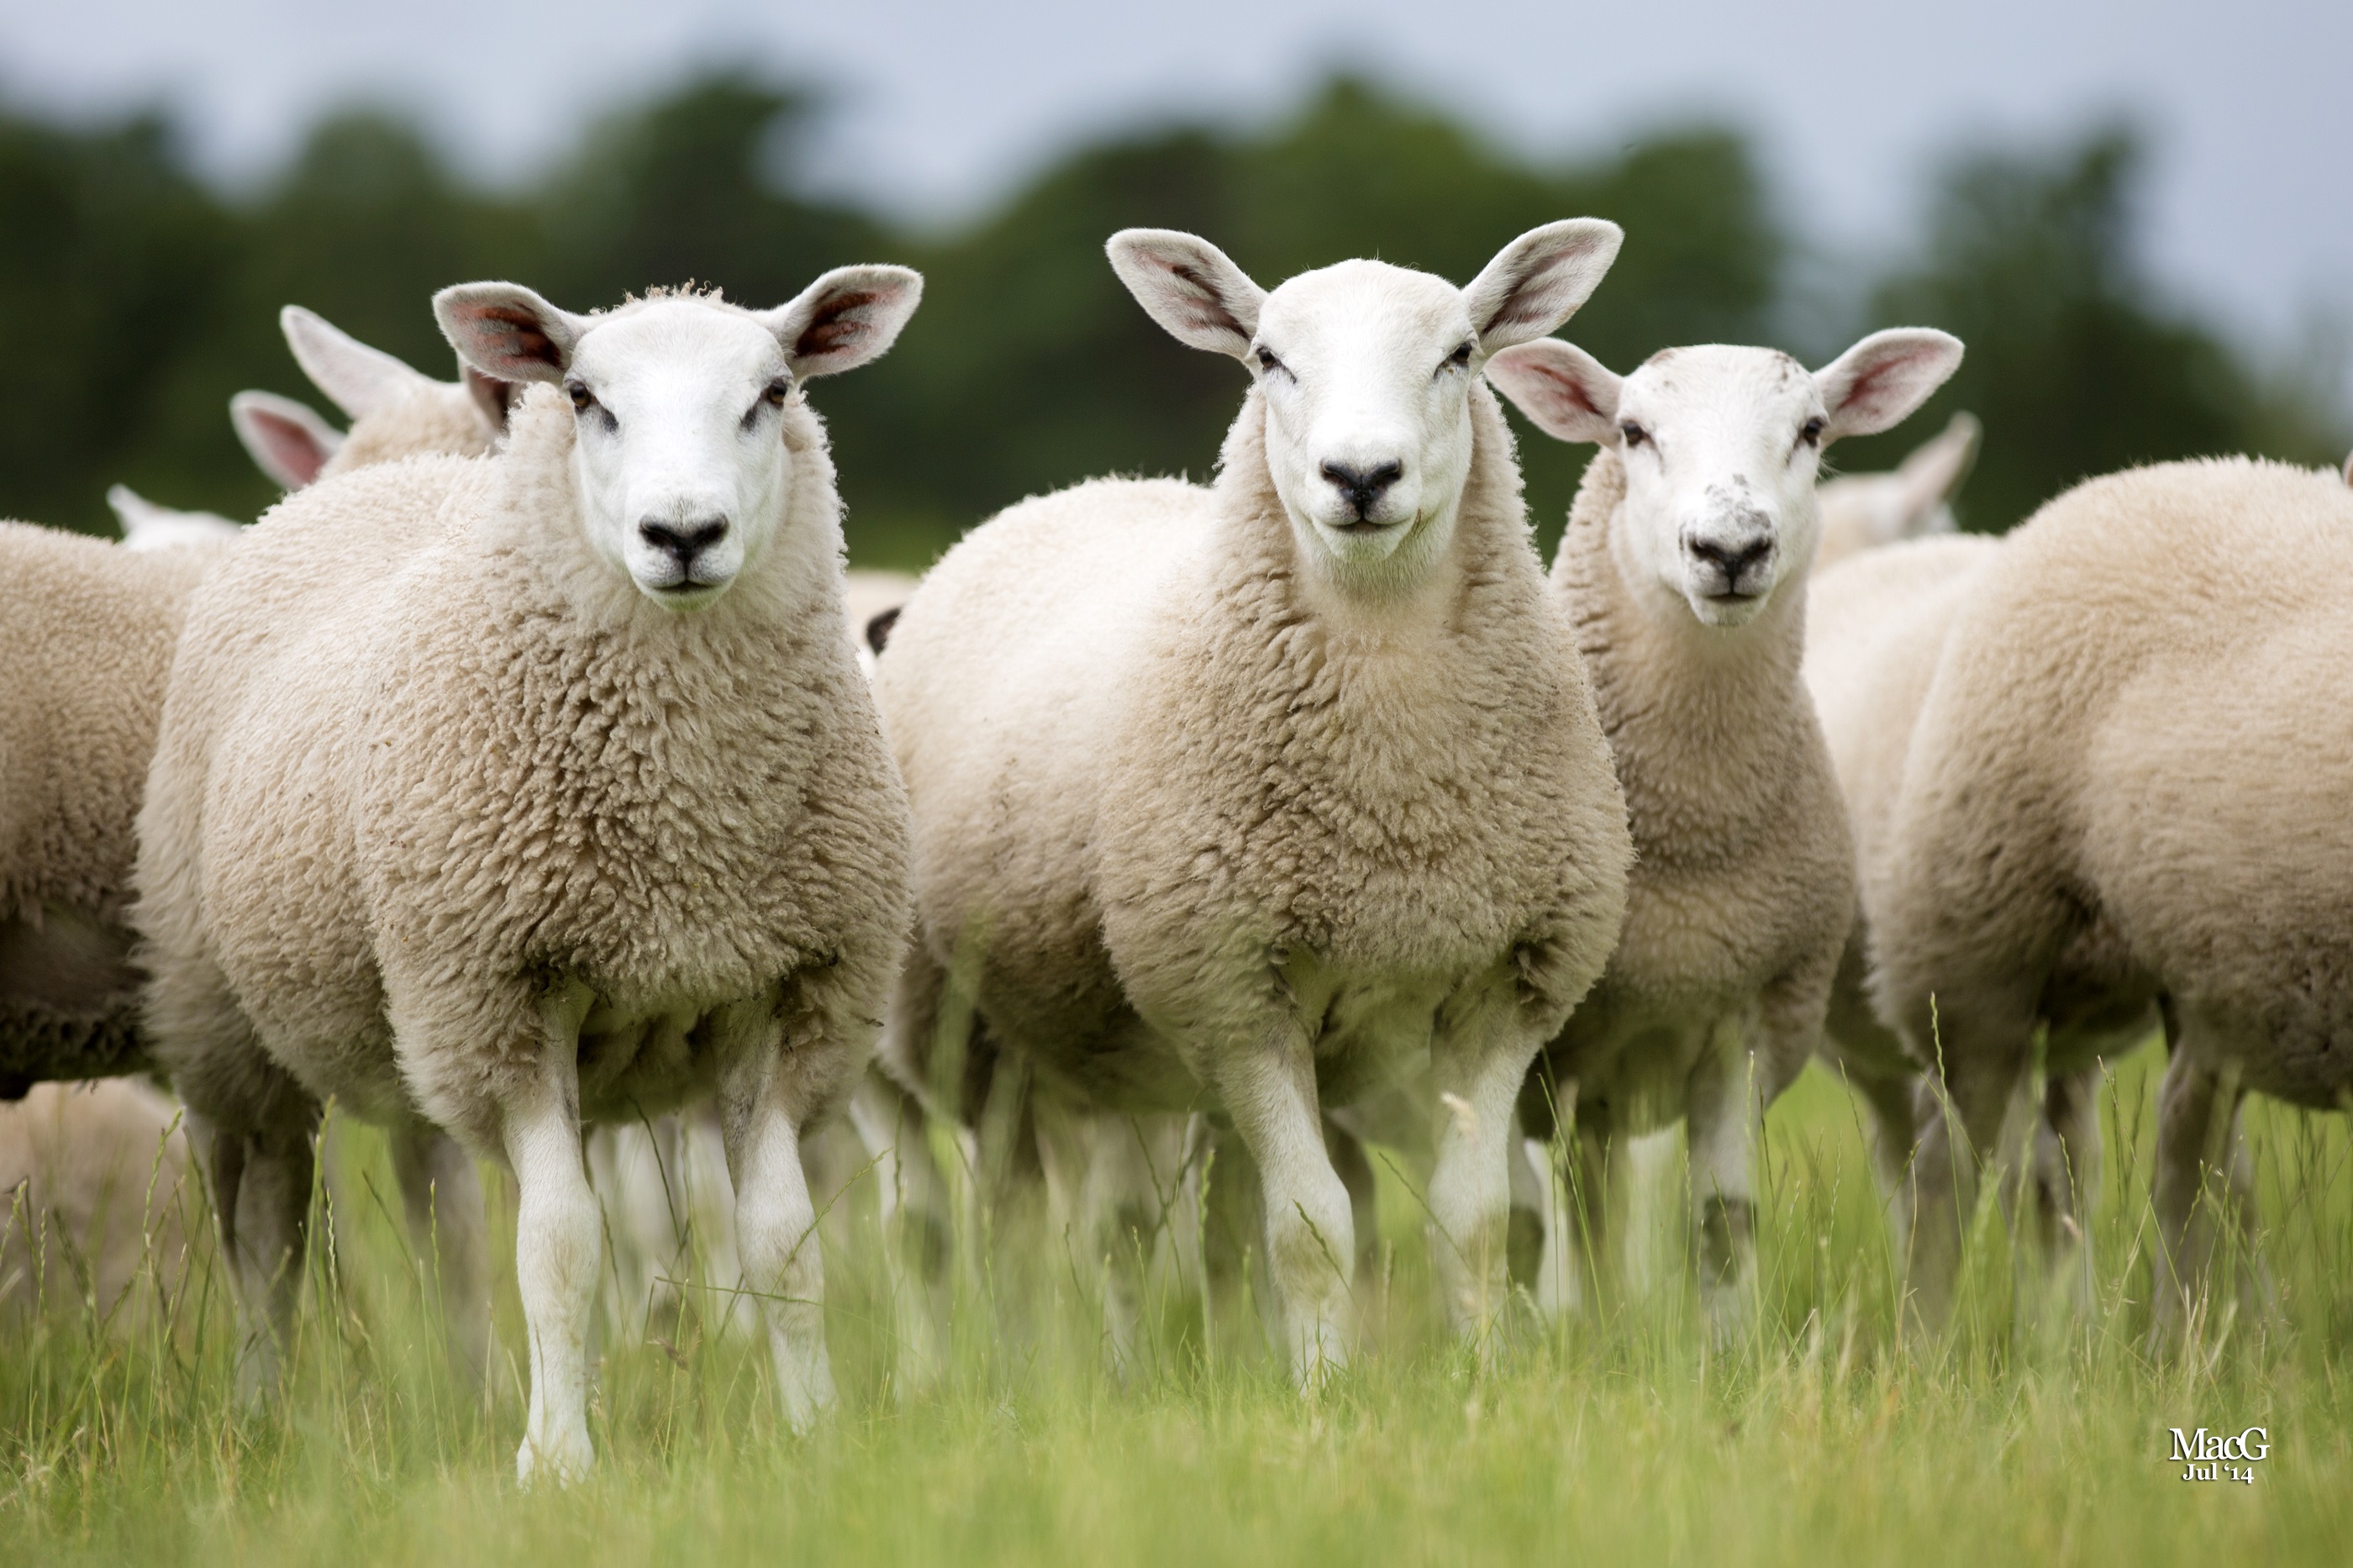 New-research-examines-ways-to-breed-and-feed-sheep-with-reduced-environmental-impact.jpg